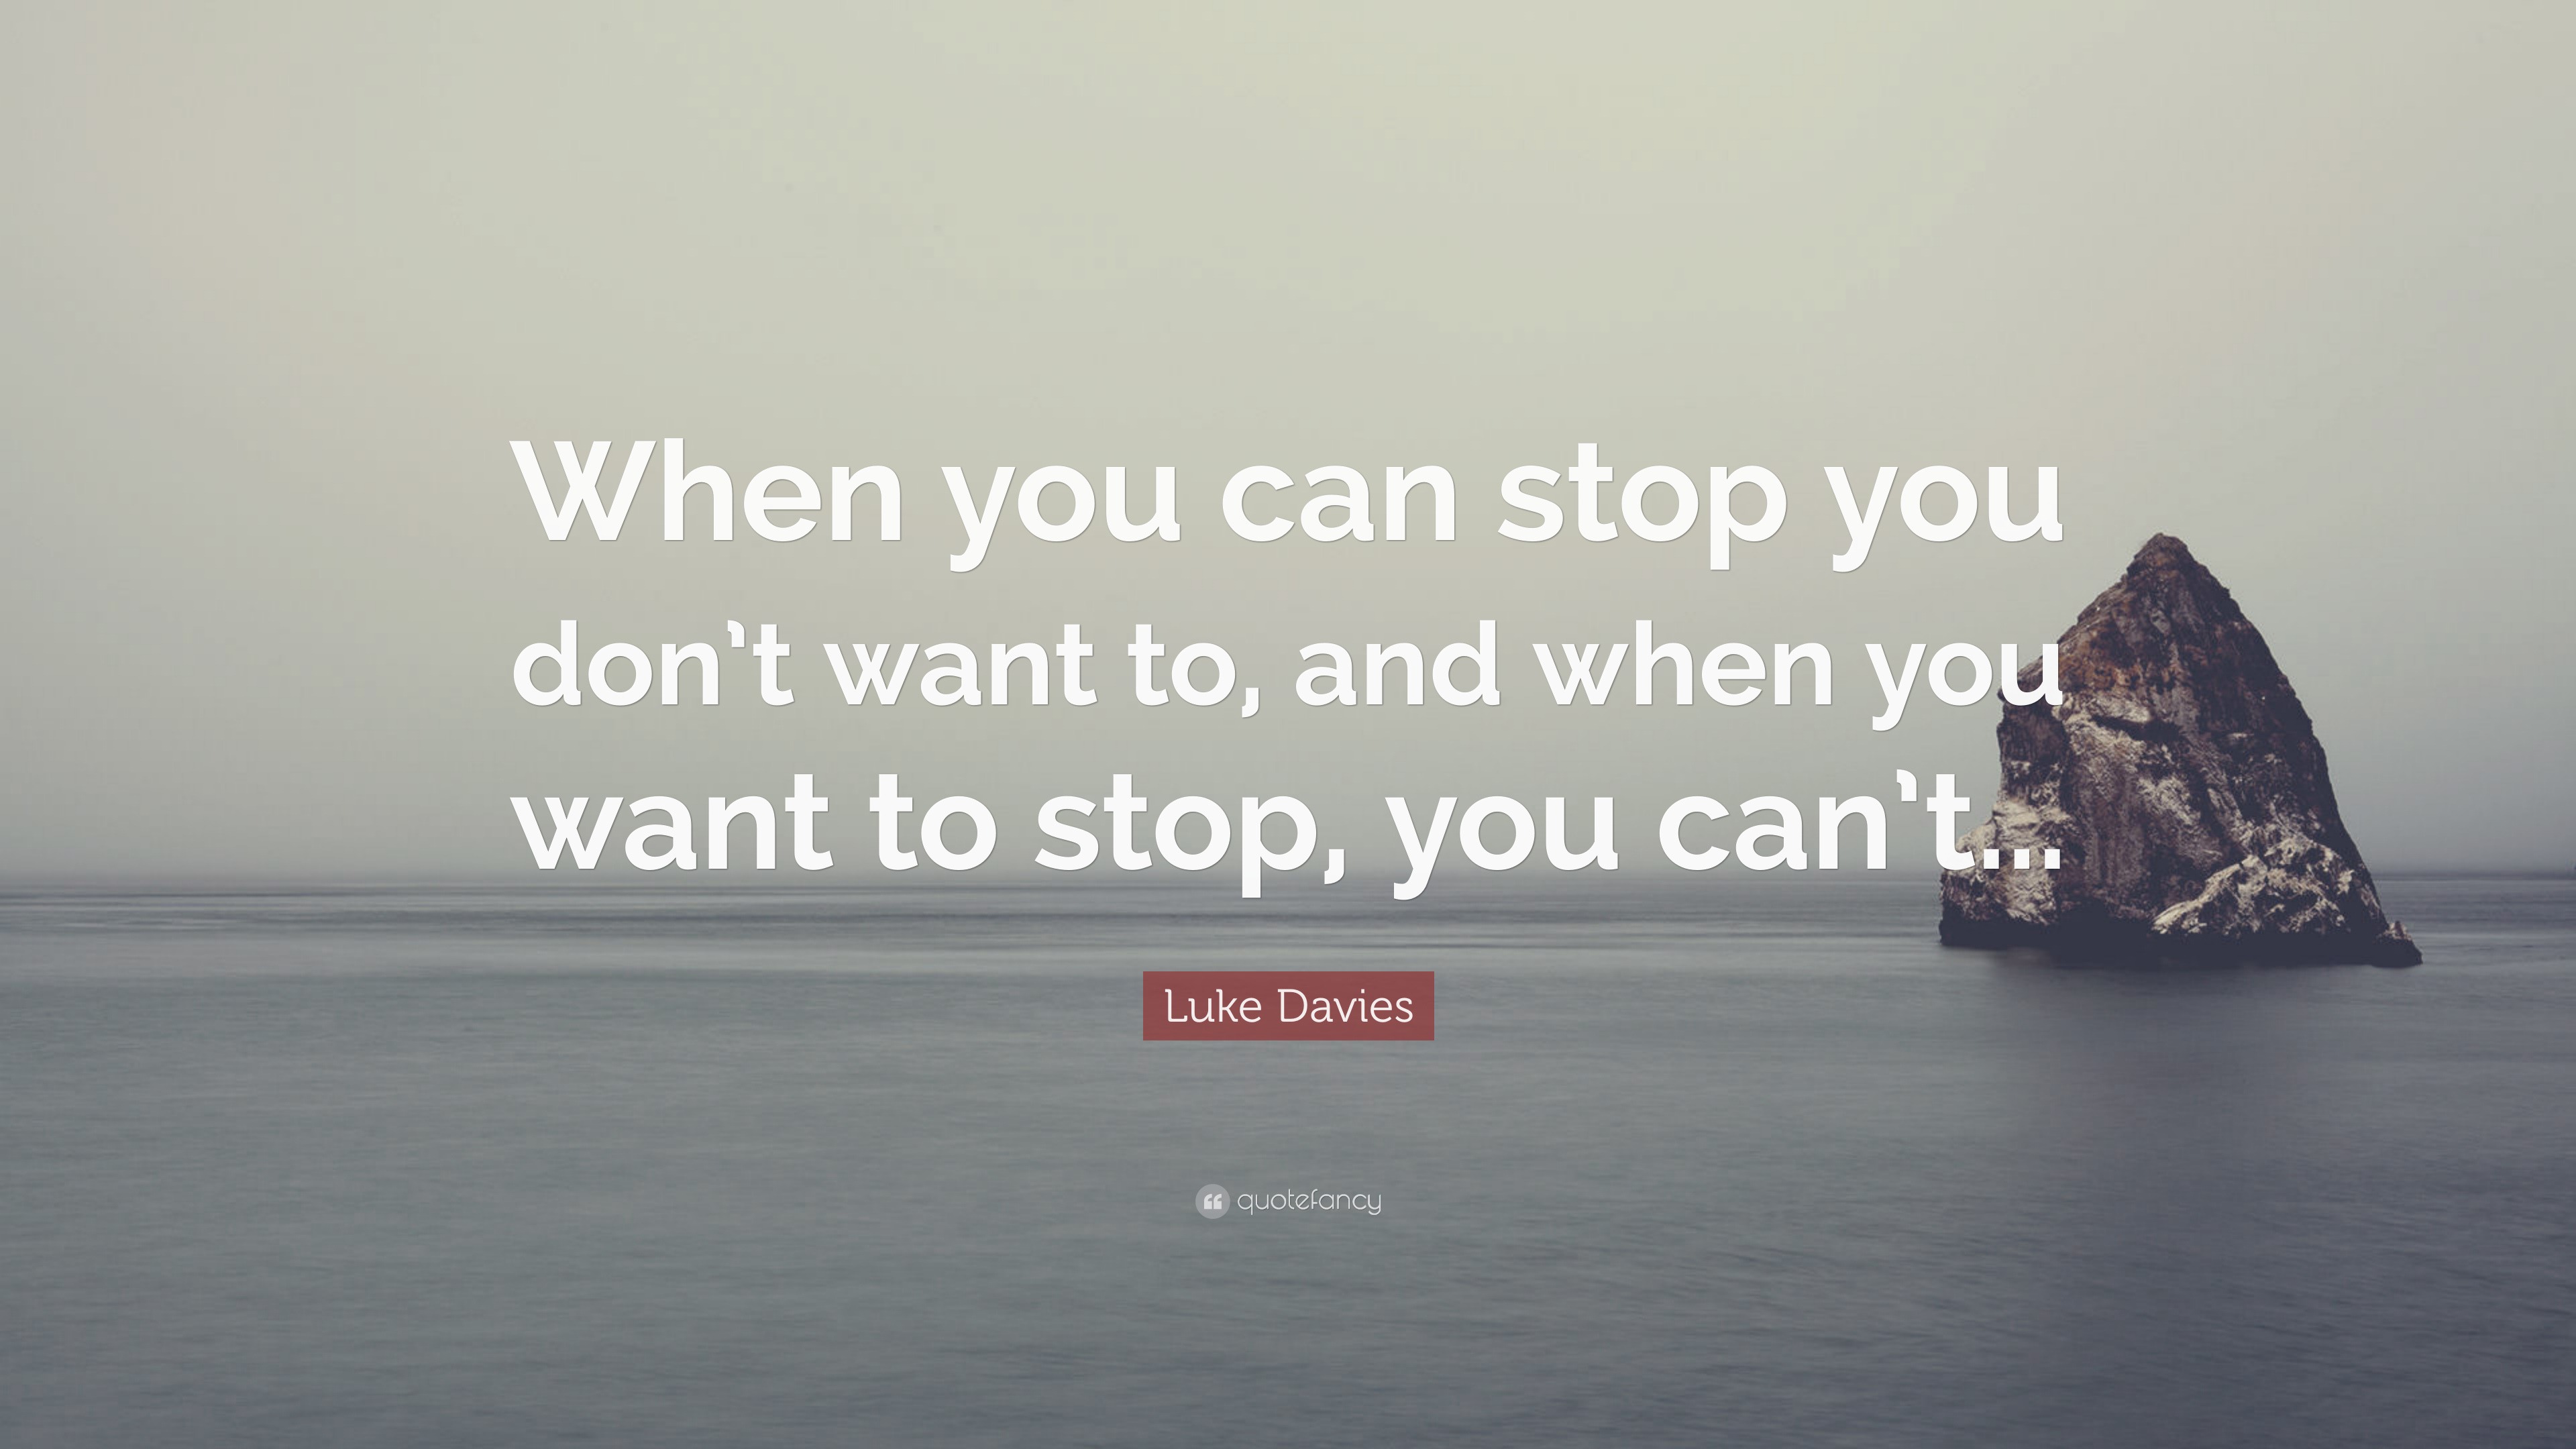 Luke Davies Quote: “When you can stop you don’t want to, and when you ...